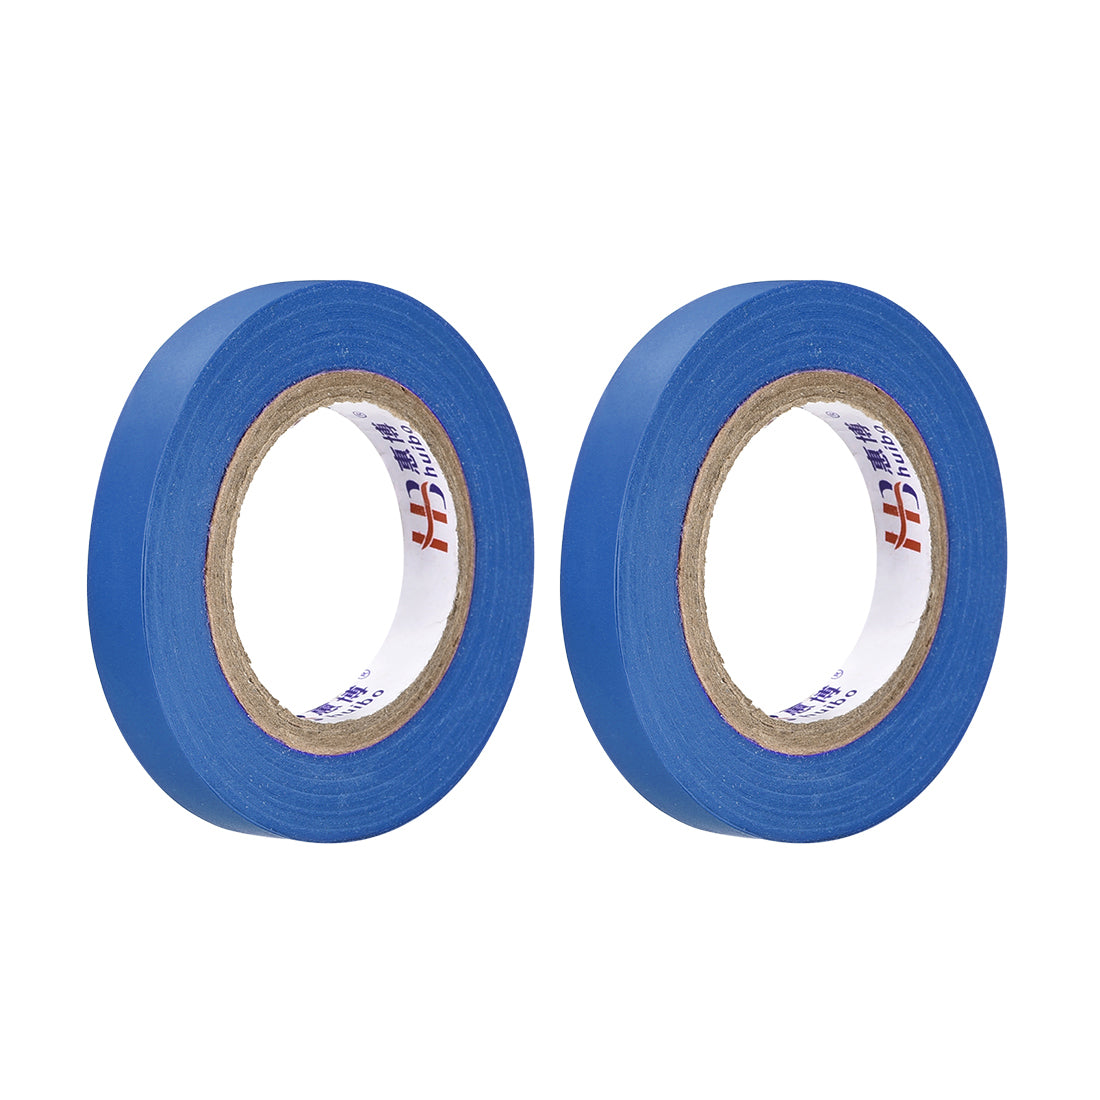 uxcell Uxcell Insulating Tape 10mm Width 14.5M Long 0.15mm Thick PVC Electrical Tape Rated for Max. 400V  80C Use Blue 2pcs